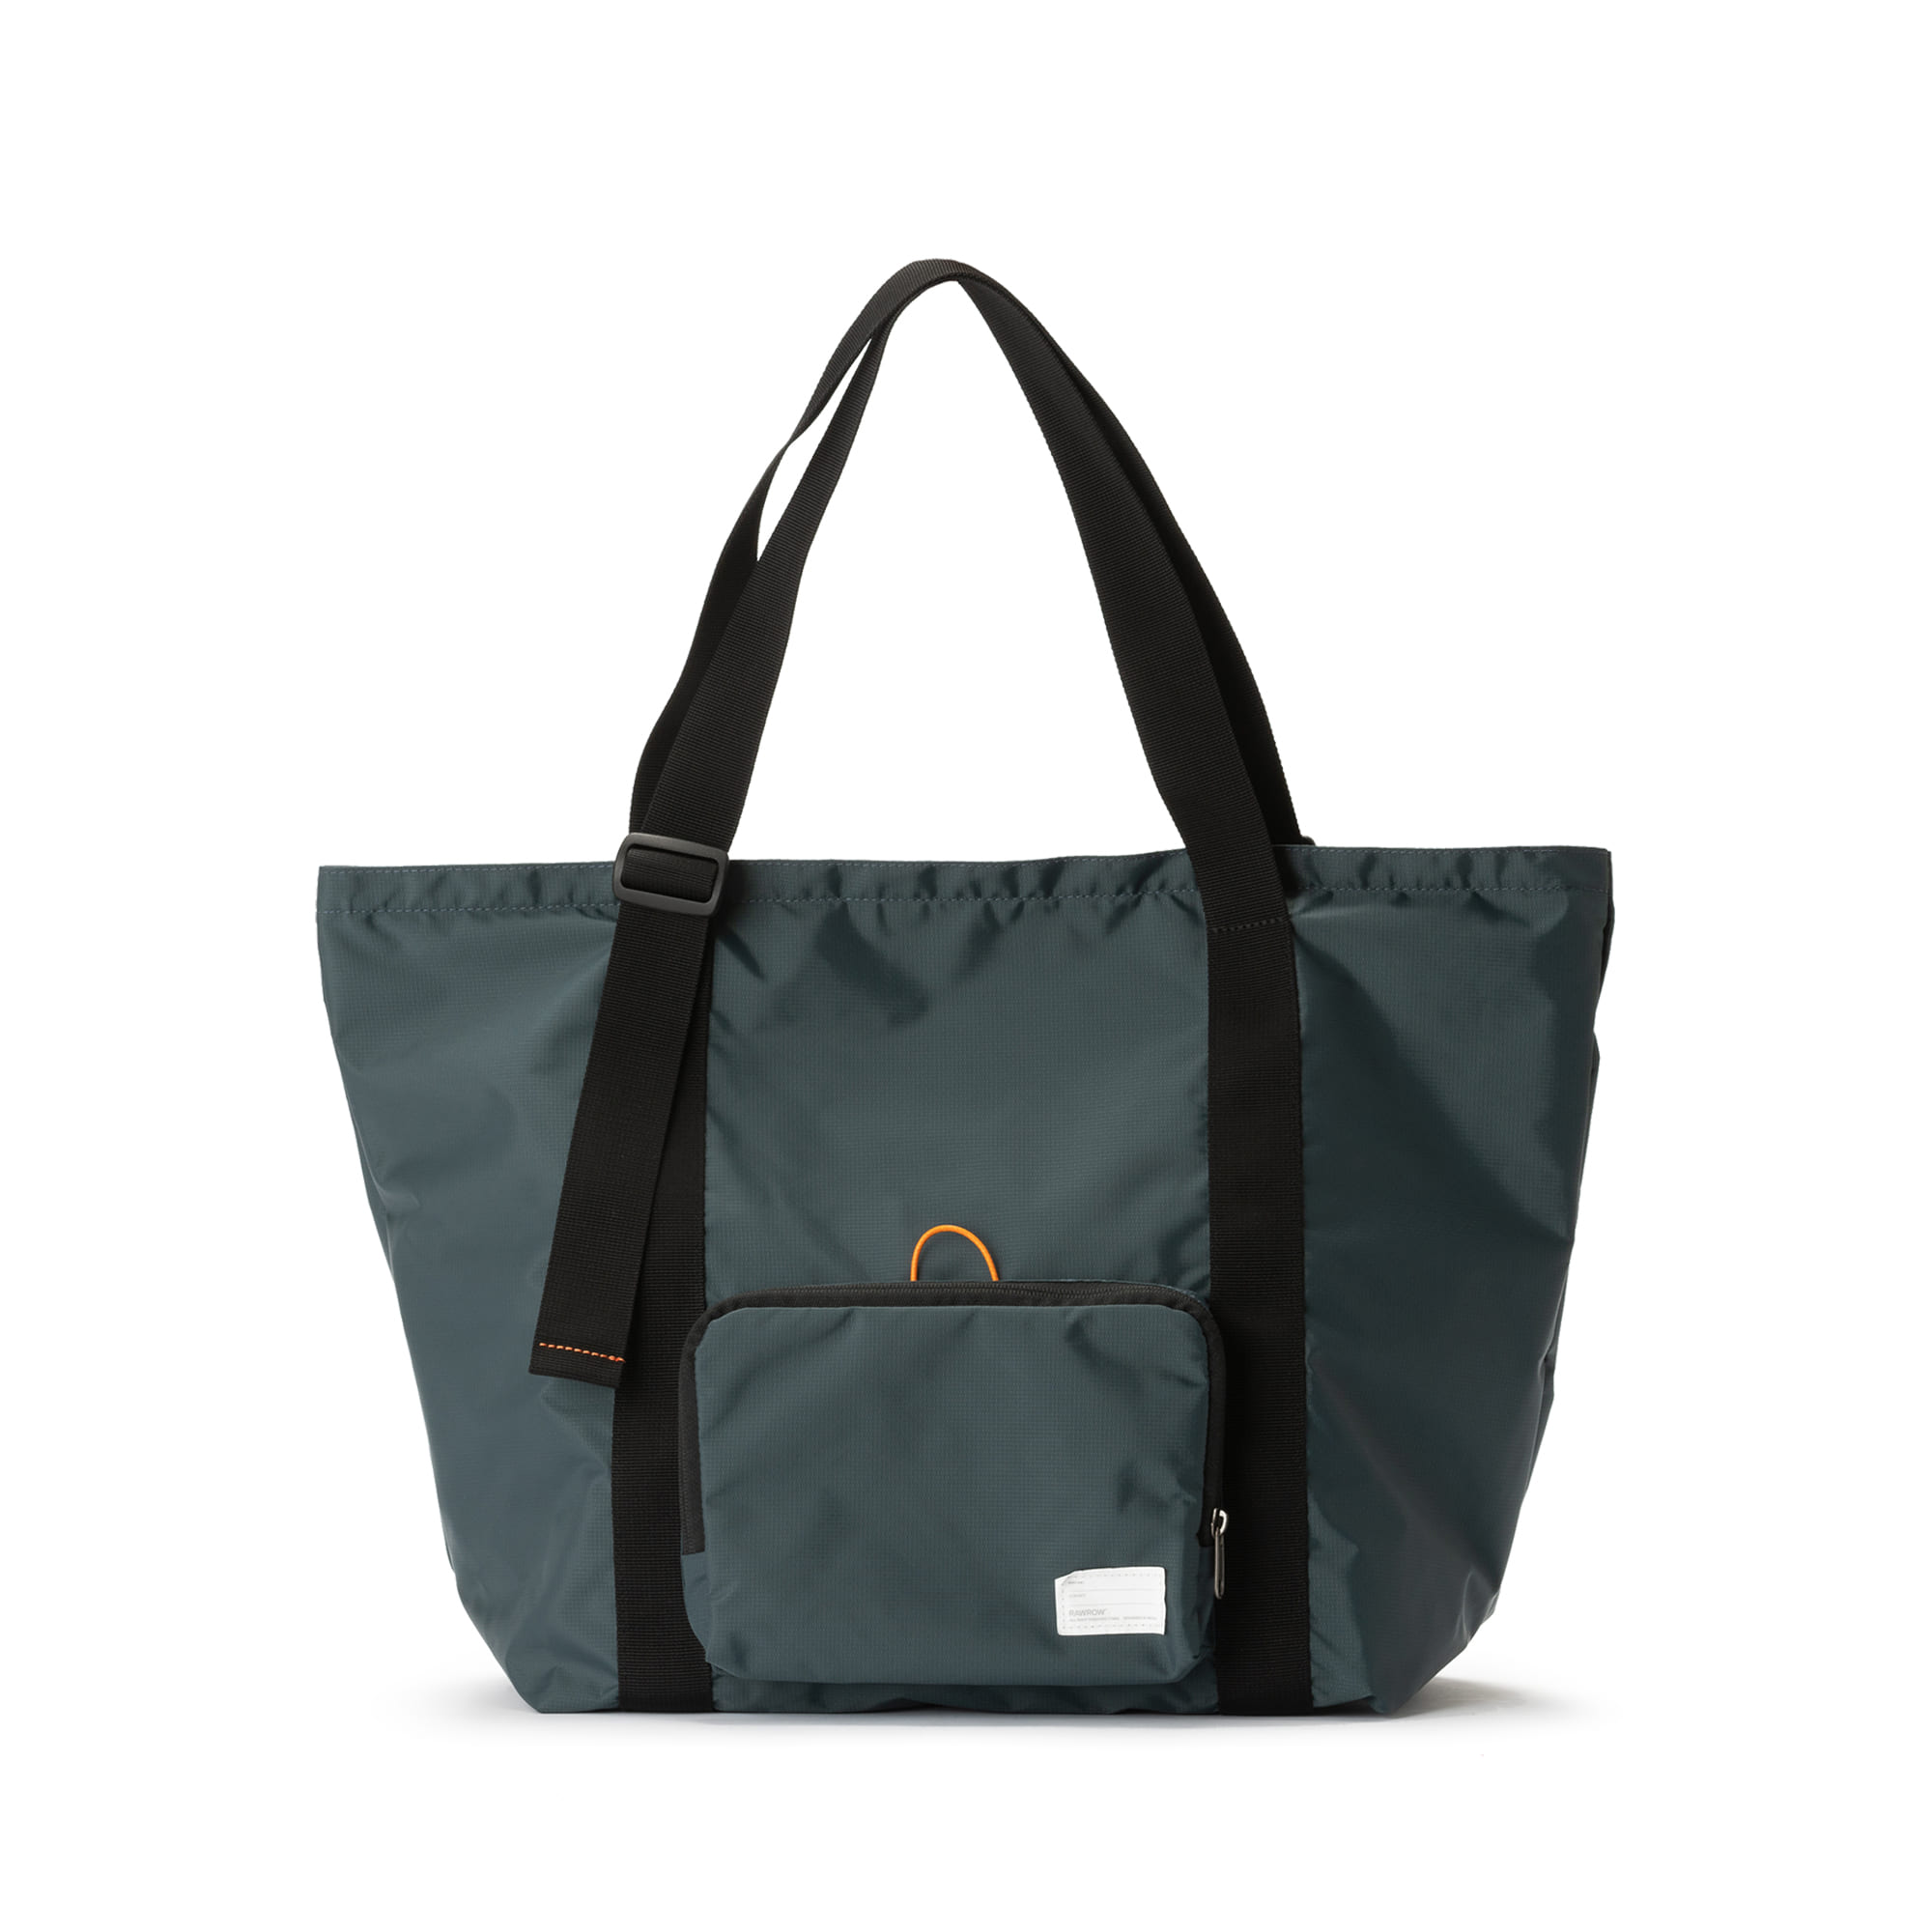 R PACKABLE TOTE 506